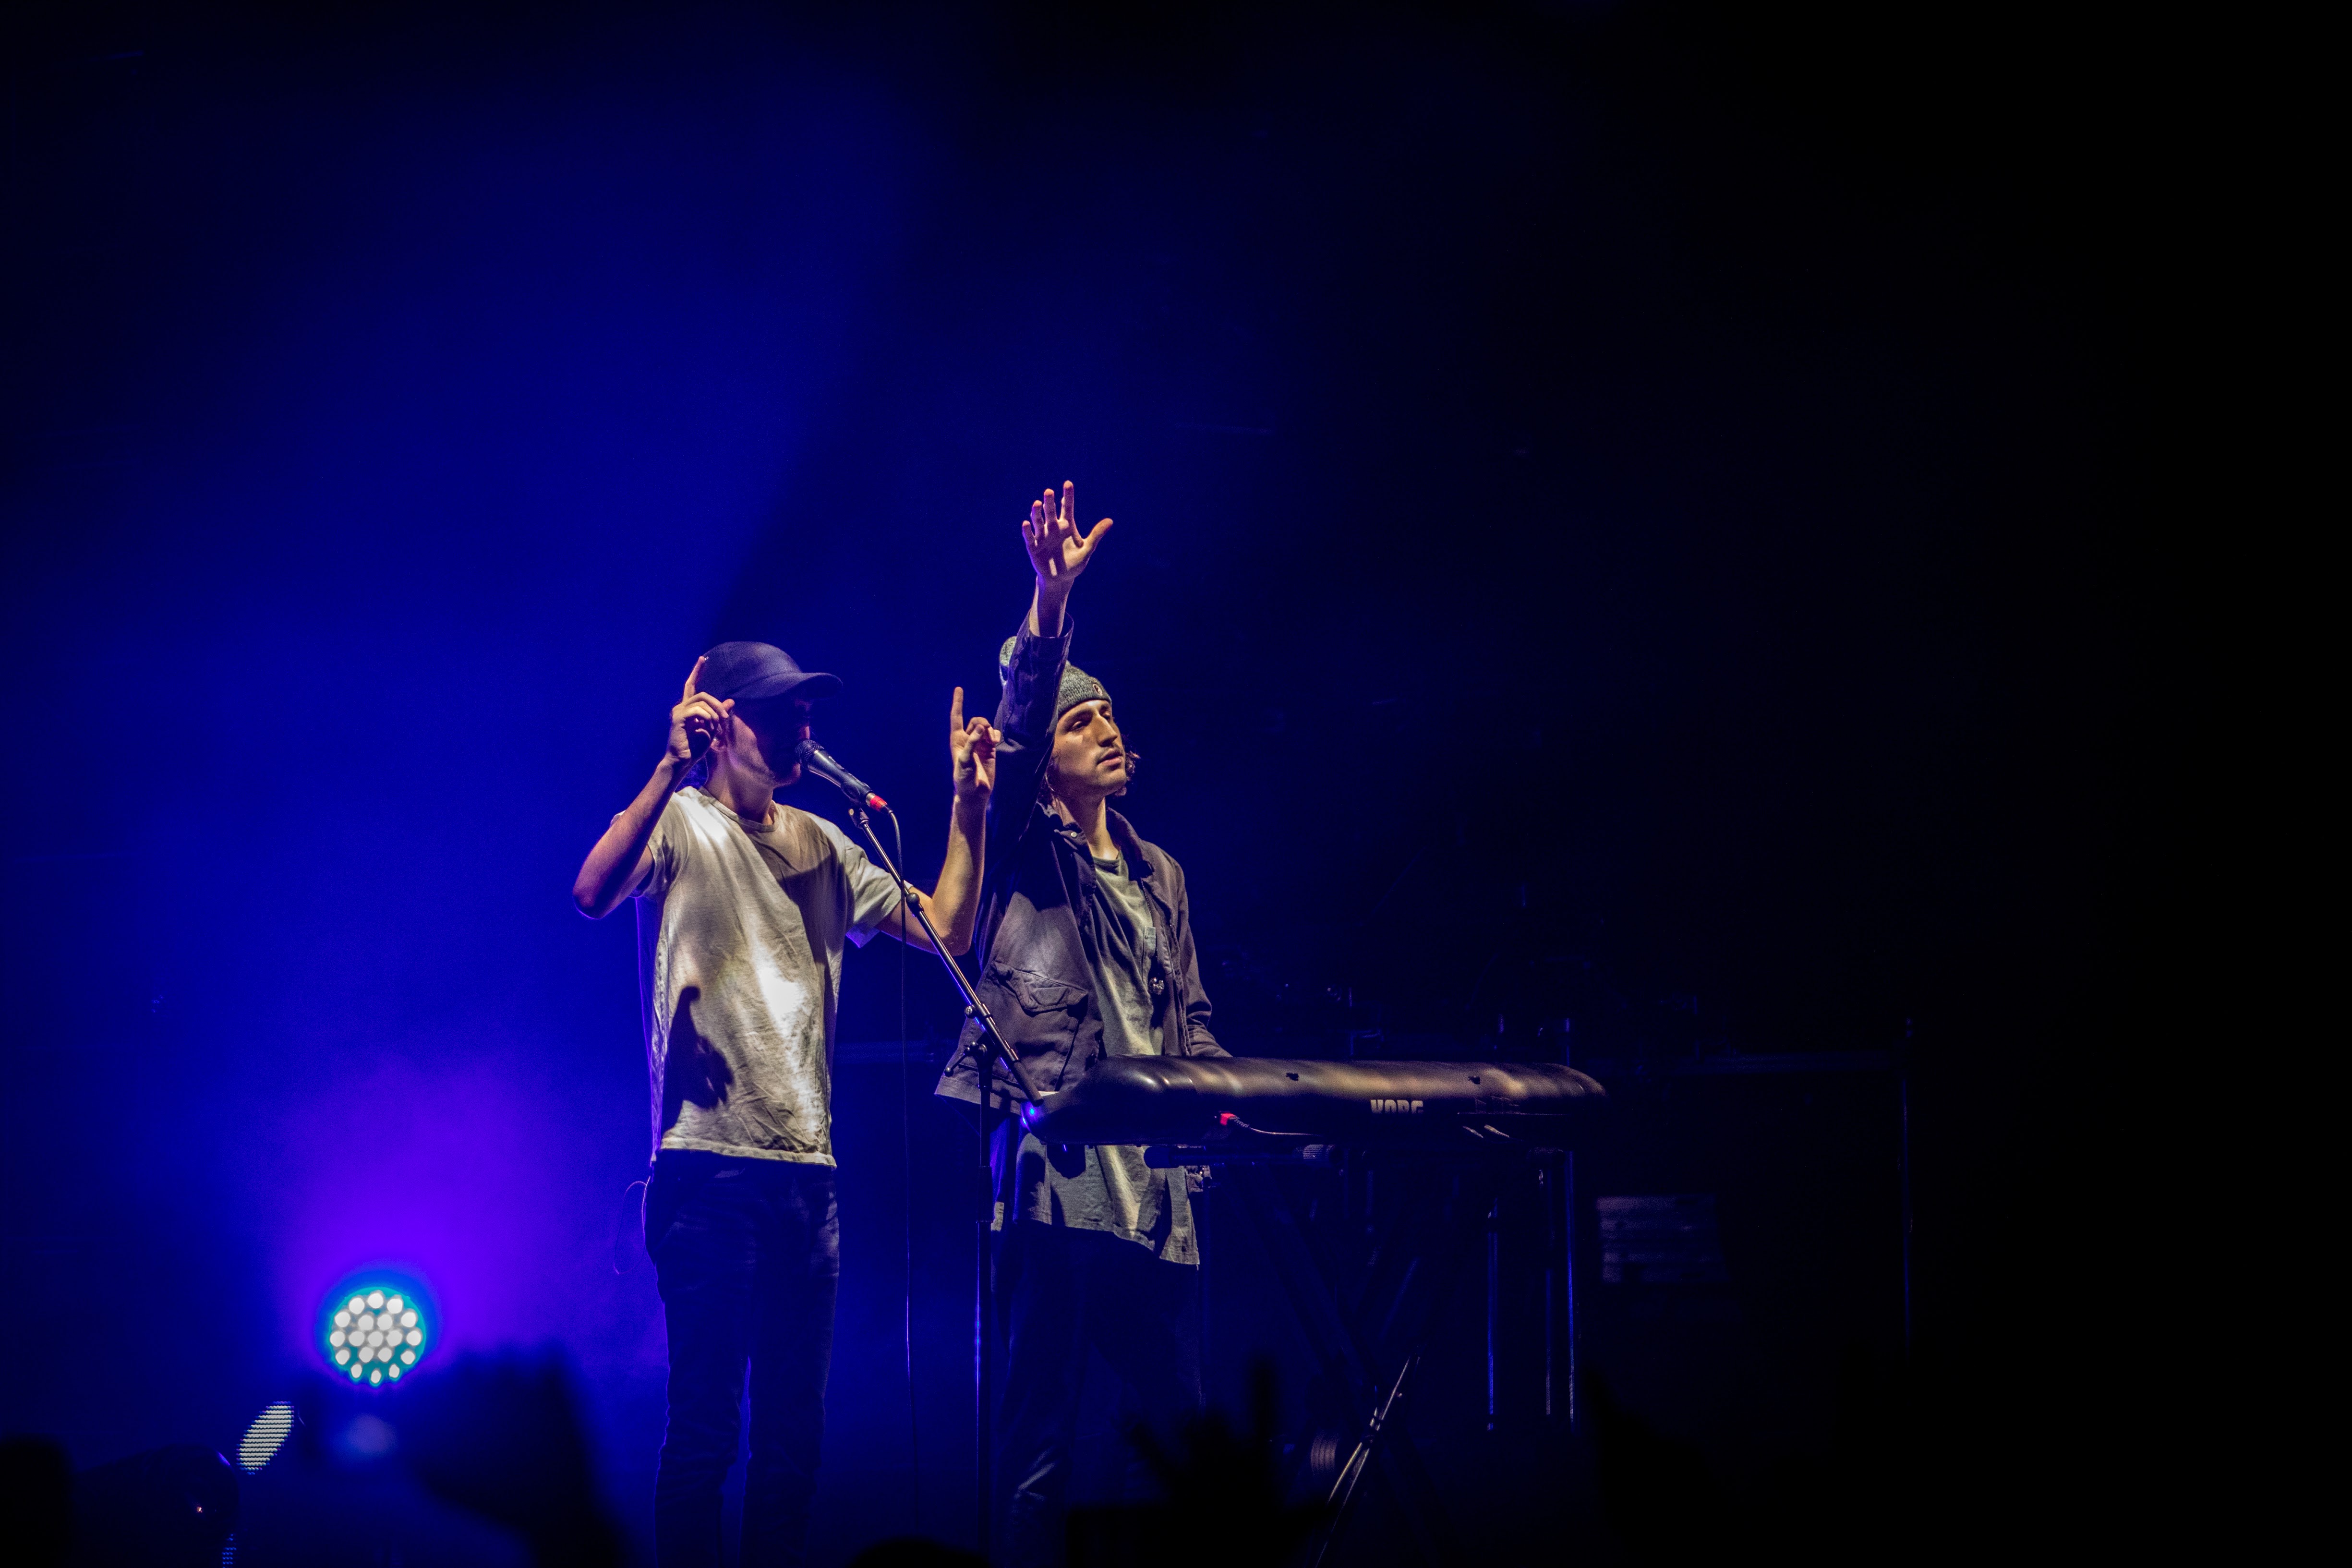 Concert review: Porter Robinson and Madeon’s tour to end all tours